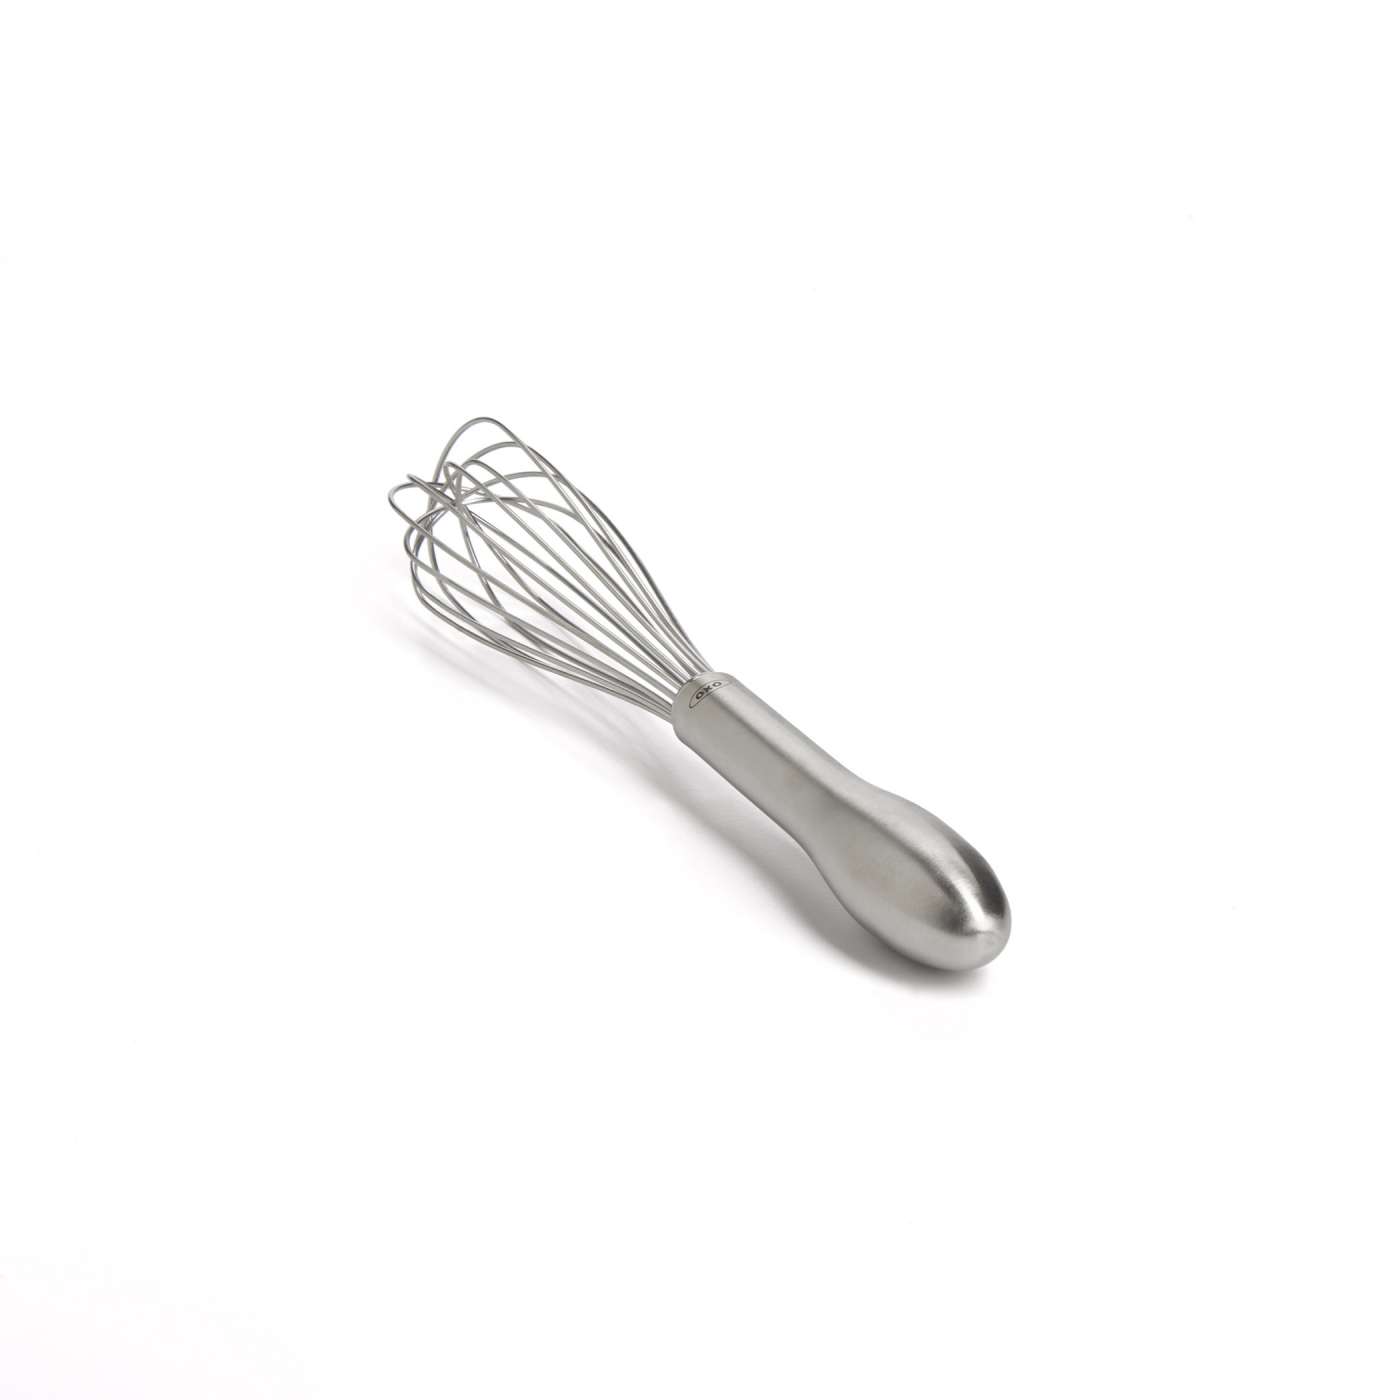 OXO Stainless Steel 9-Inch Whisk, 1050058